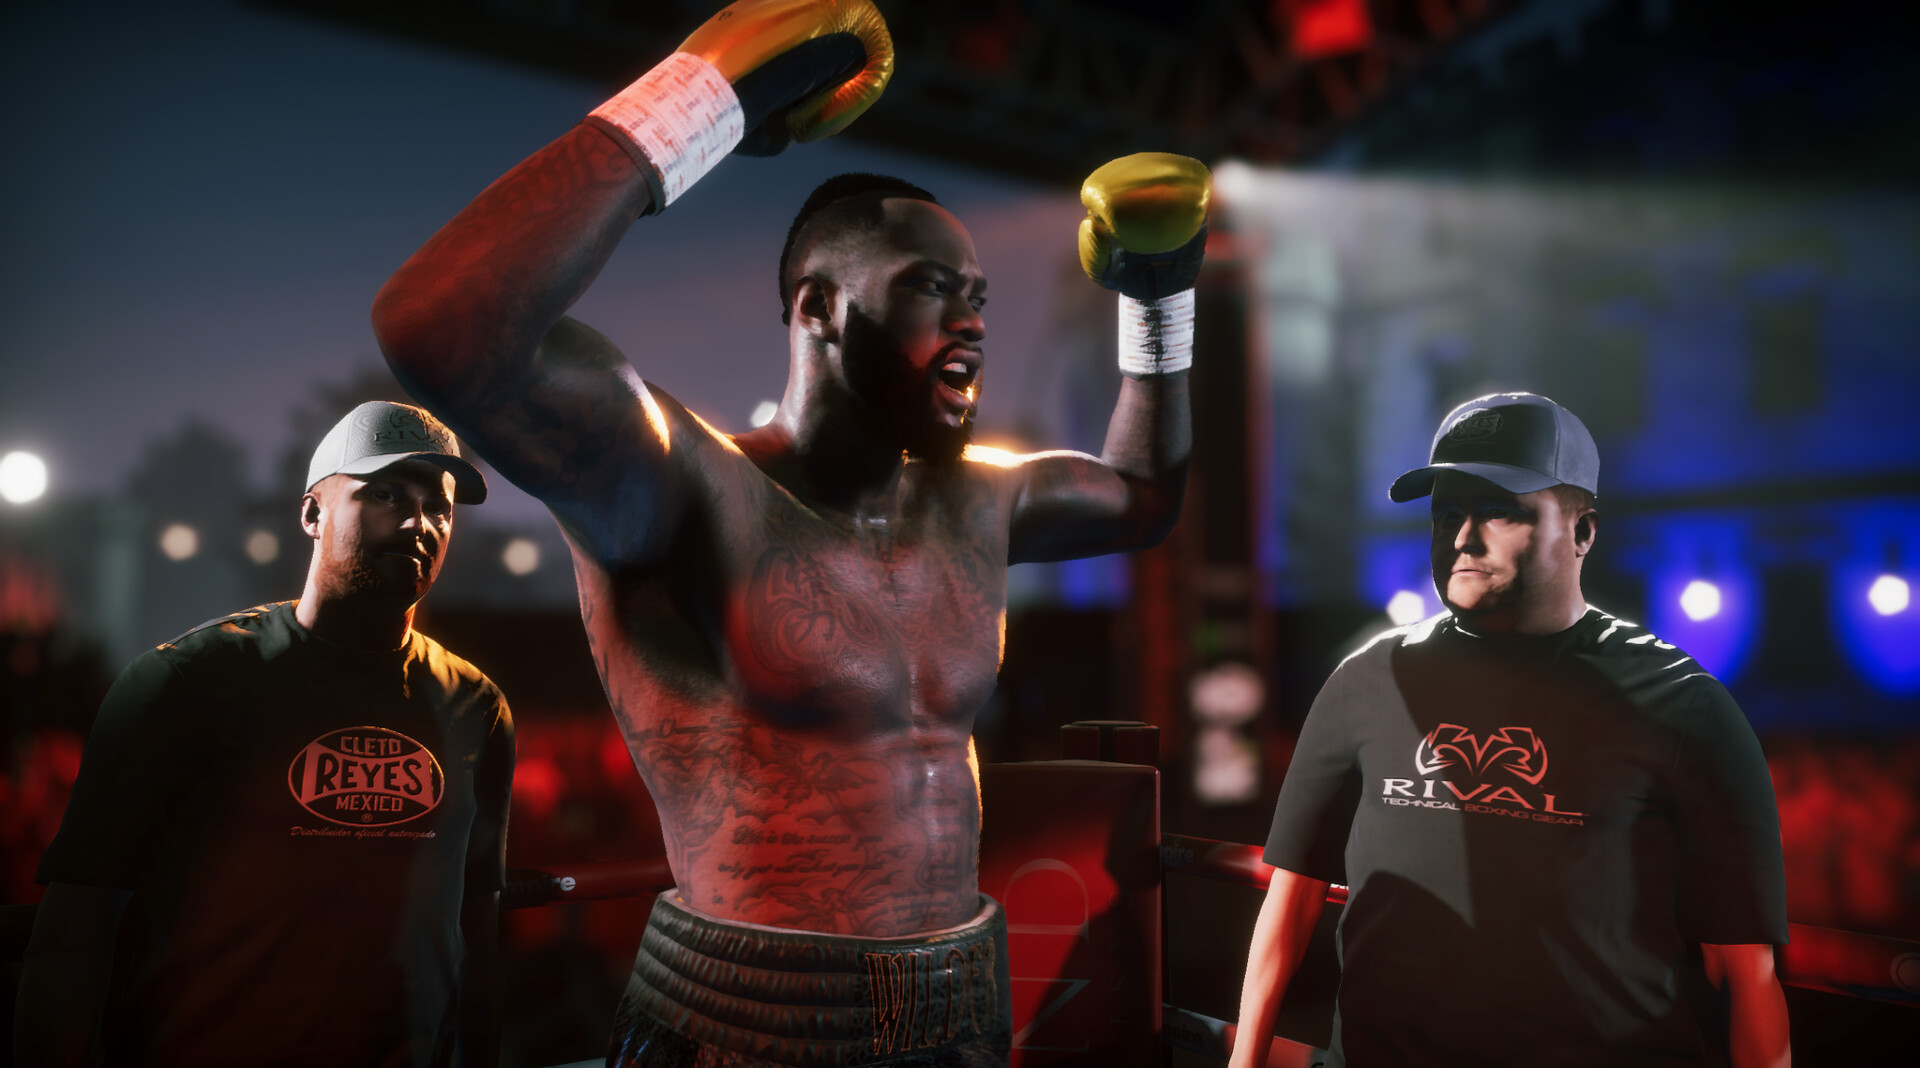 All active Boxing Beta codes to redeem free cash